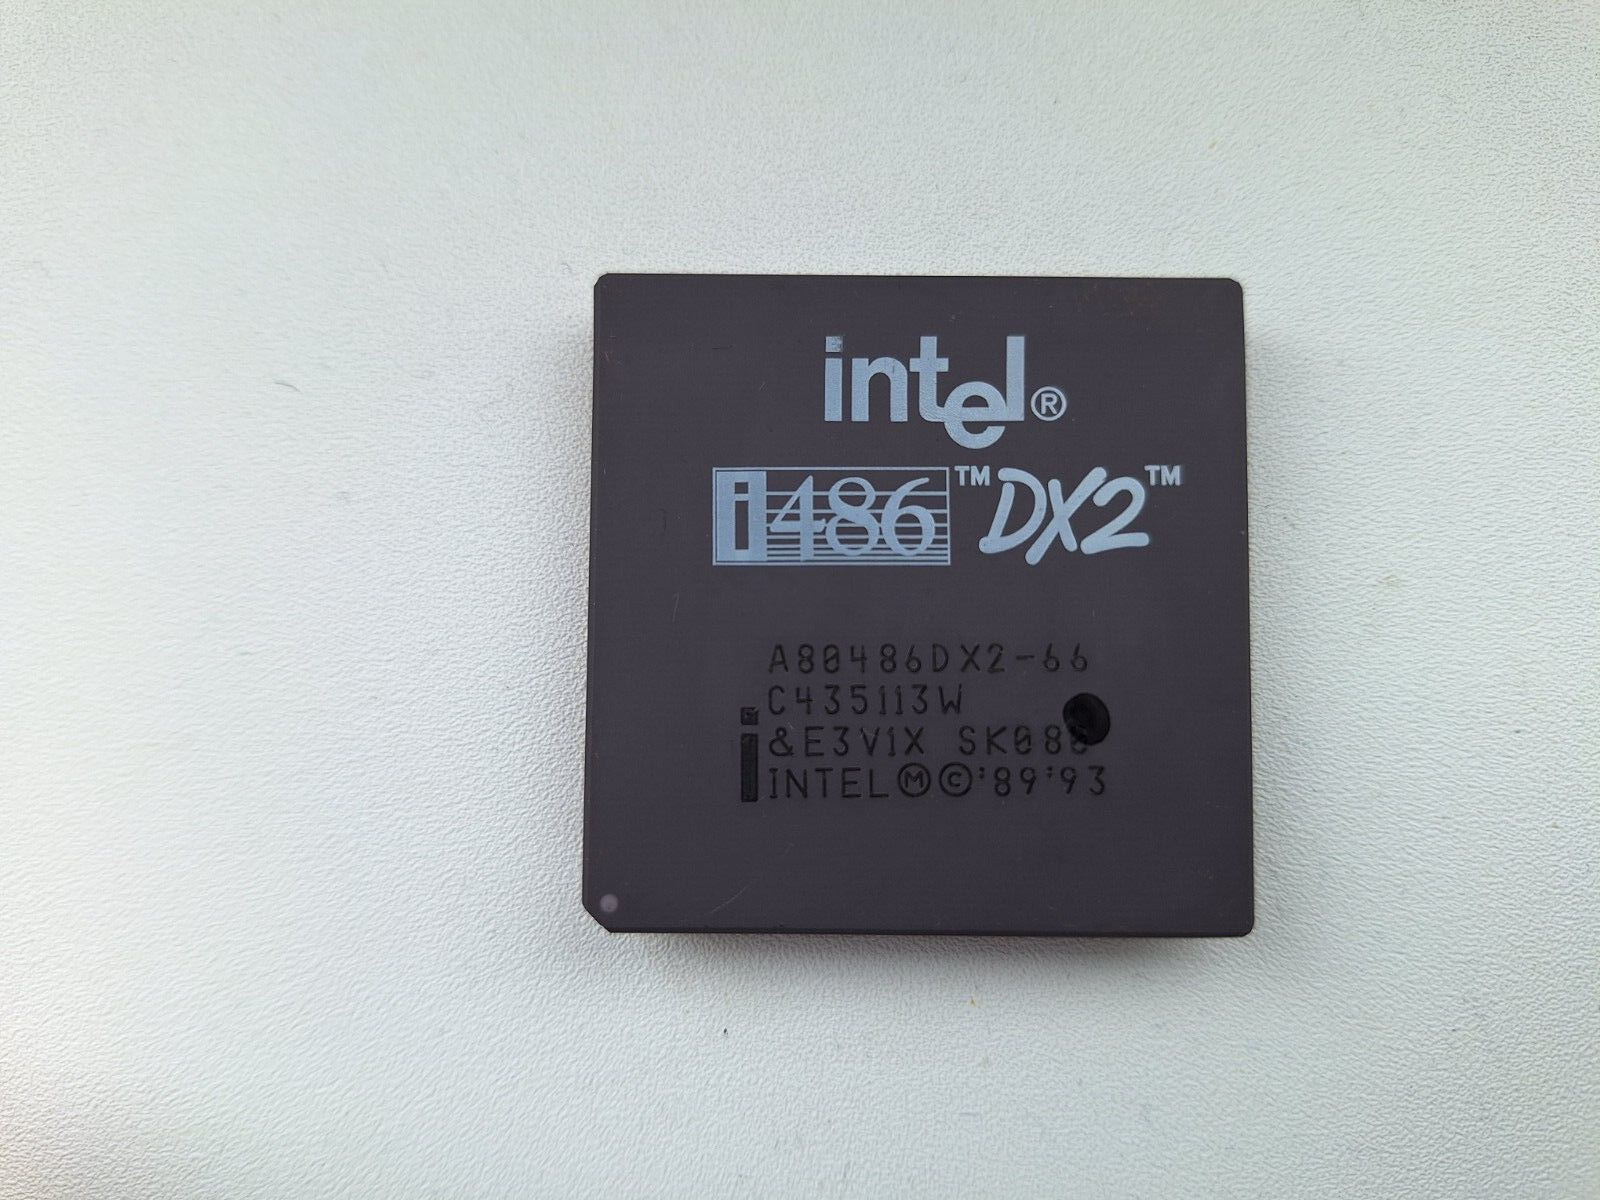 Intel A80486DX2-66 very rare SK080 factory remarked DX4-100 vintage CPU GOLD